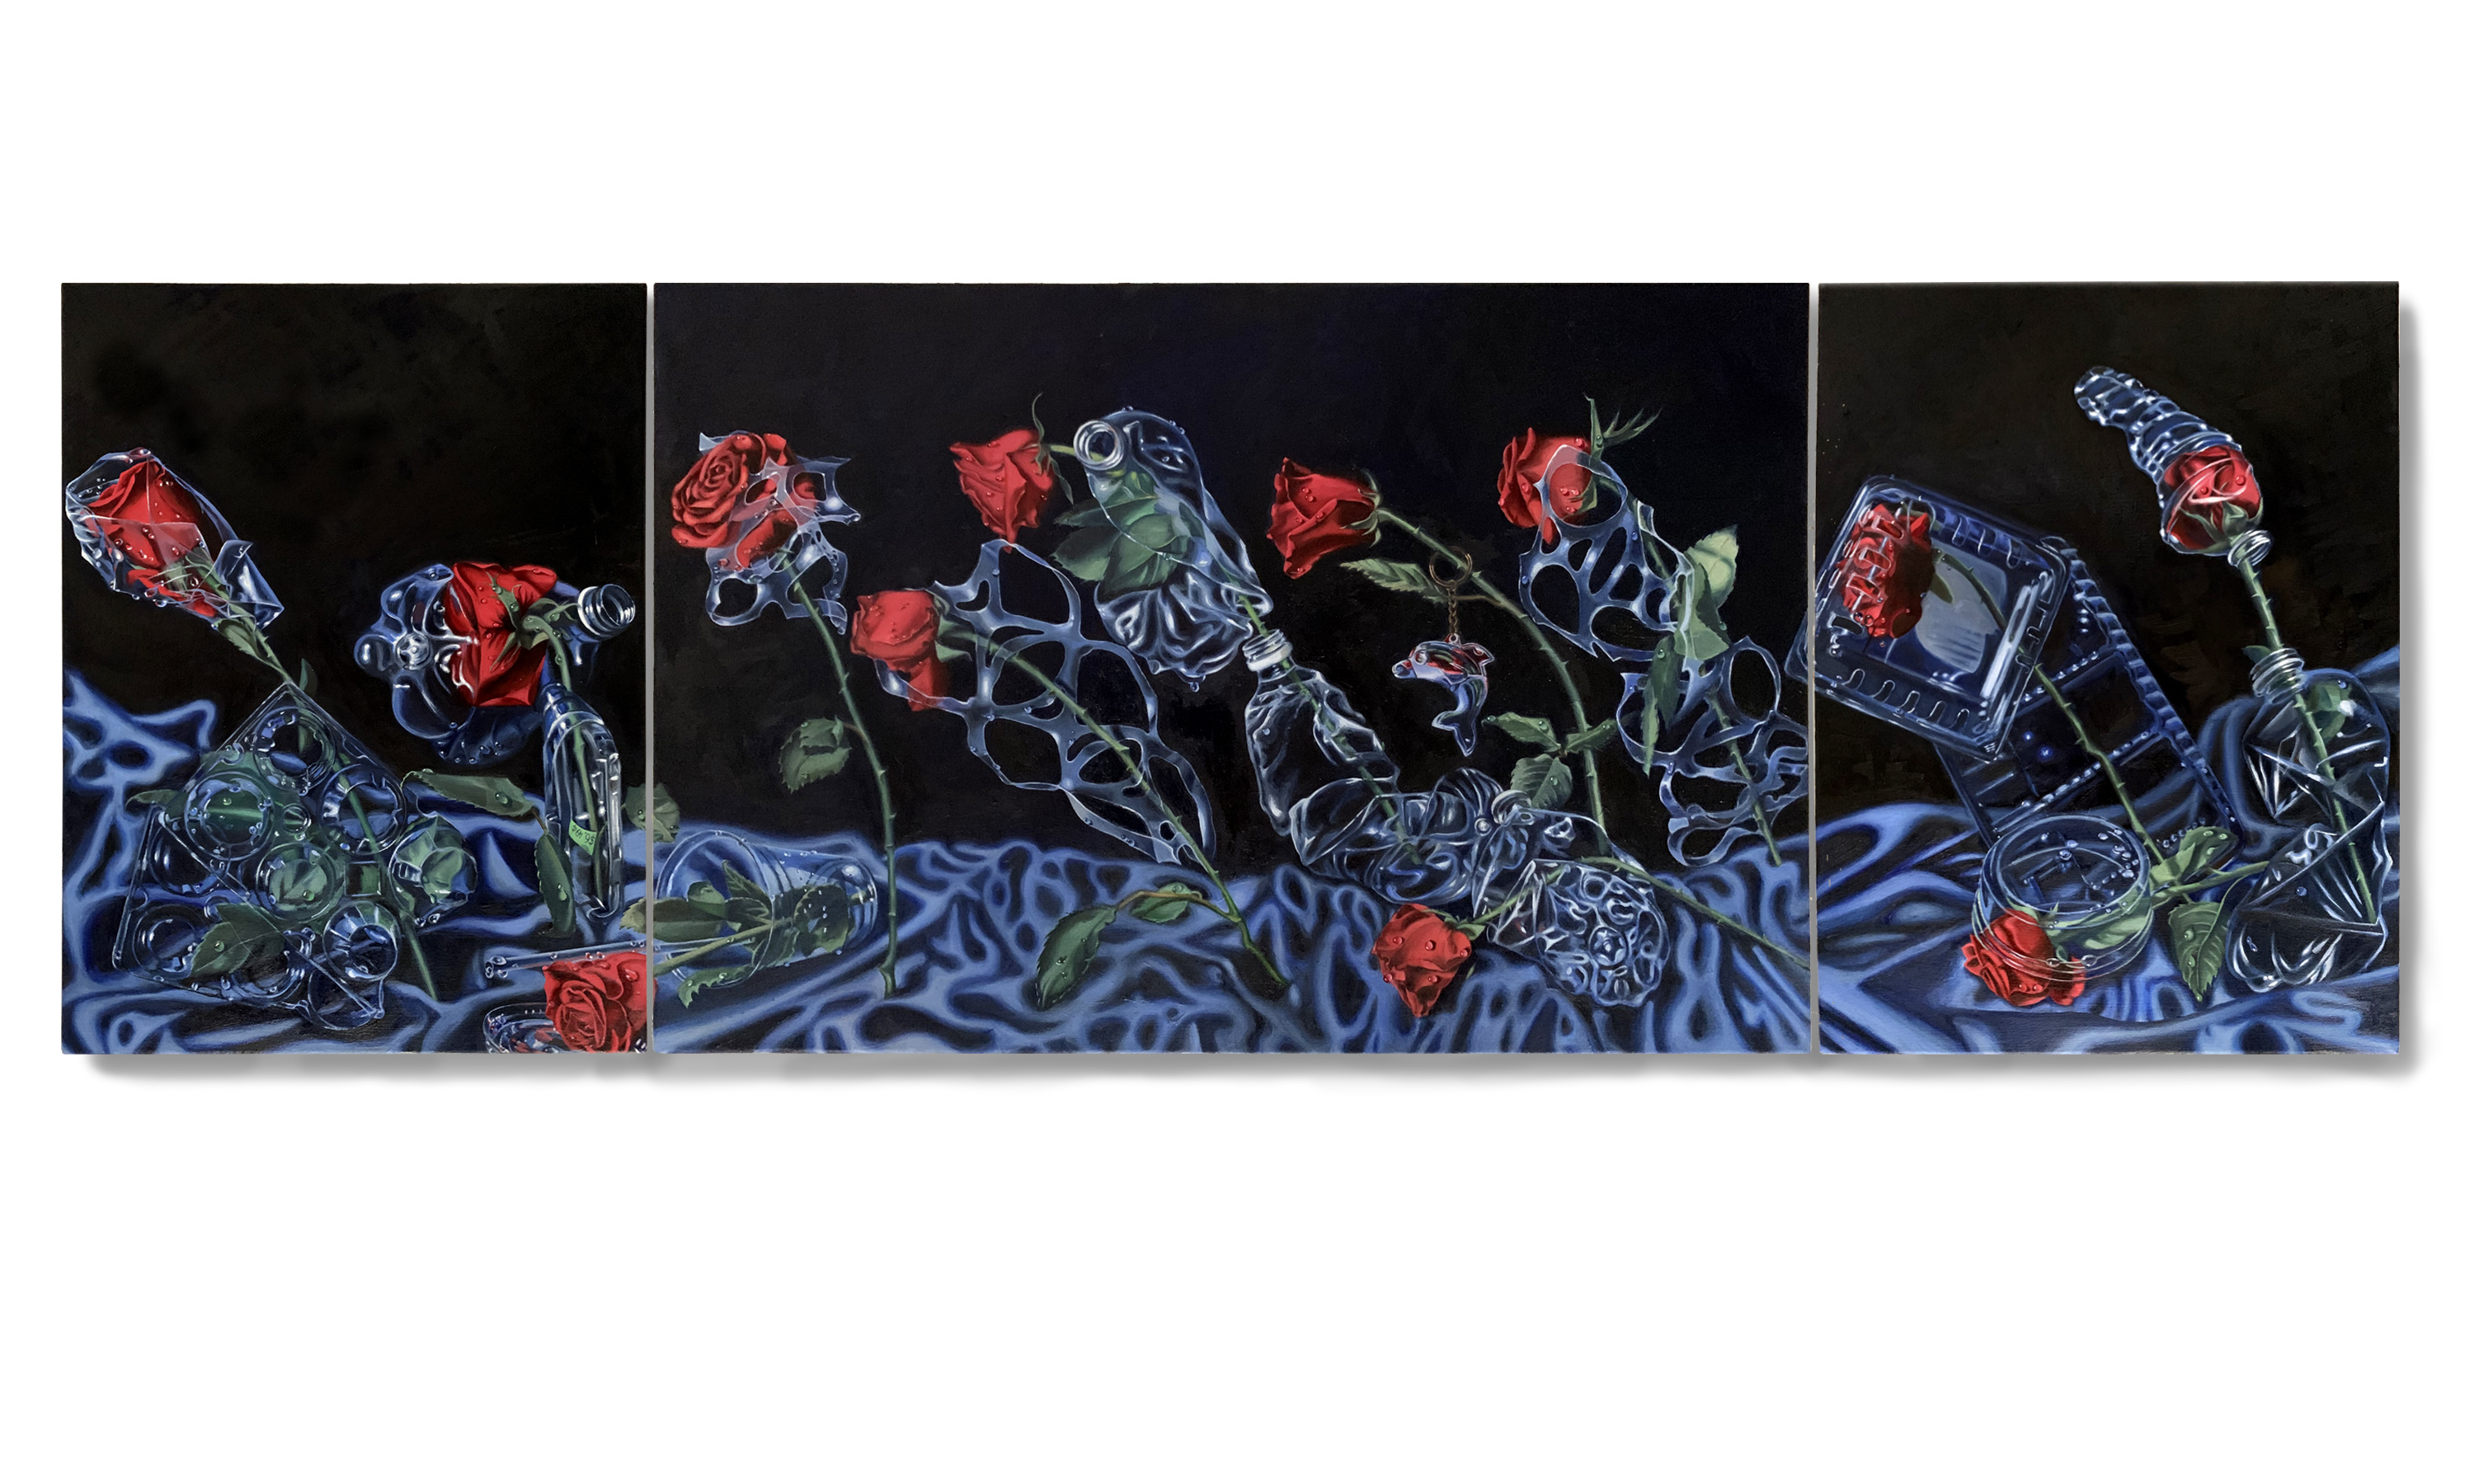 Bed Of Roses (Triptych), 20x60 2021 <br>oil on canvas<br><br>As mentioned by marine biologist, Dr. Ayana Johnson, in Alie Ward’s podcast, “Ologies with Alie Ward”, "We are starting to see commitments not just at the individual level like giving up plastic straws and bags and carrying your own water bottle, but what really inspires me is Kenya and Rwanda banning plastic bags. [...] The UN has been organizing the Clean Seas initiative and three dozen countries have signed on to make commitments to reducing ocean plastic pollution. All over the world, you are starting to see these shifts."